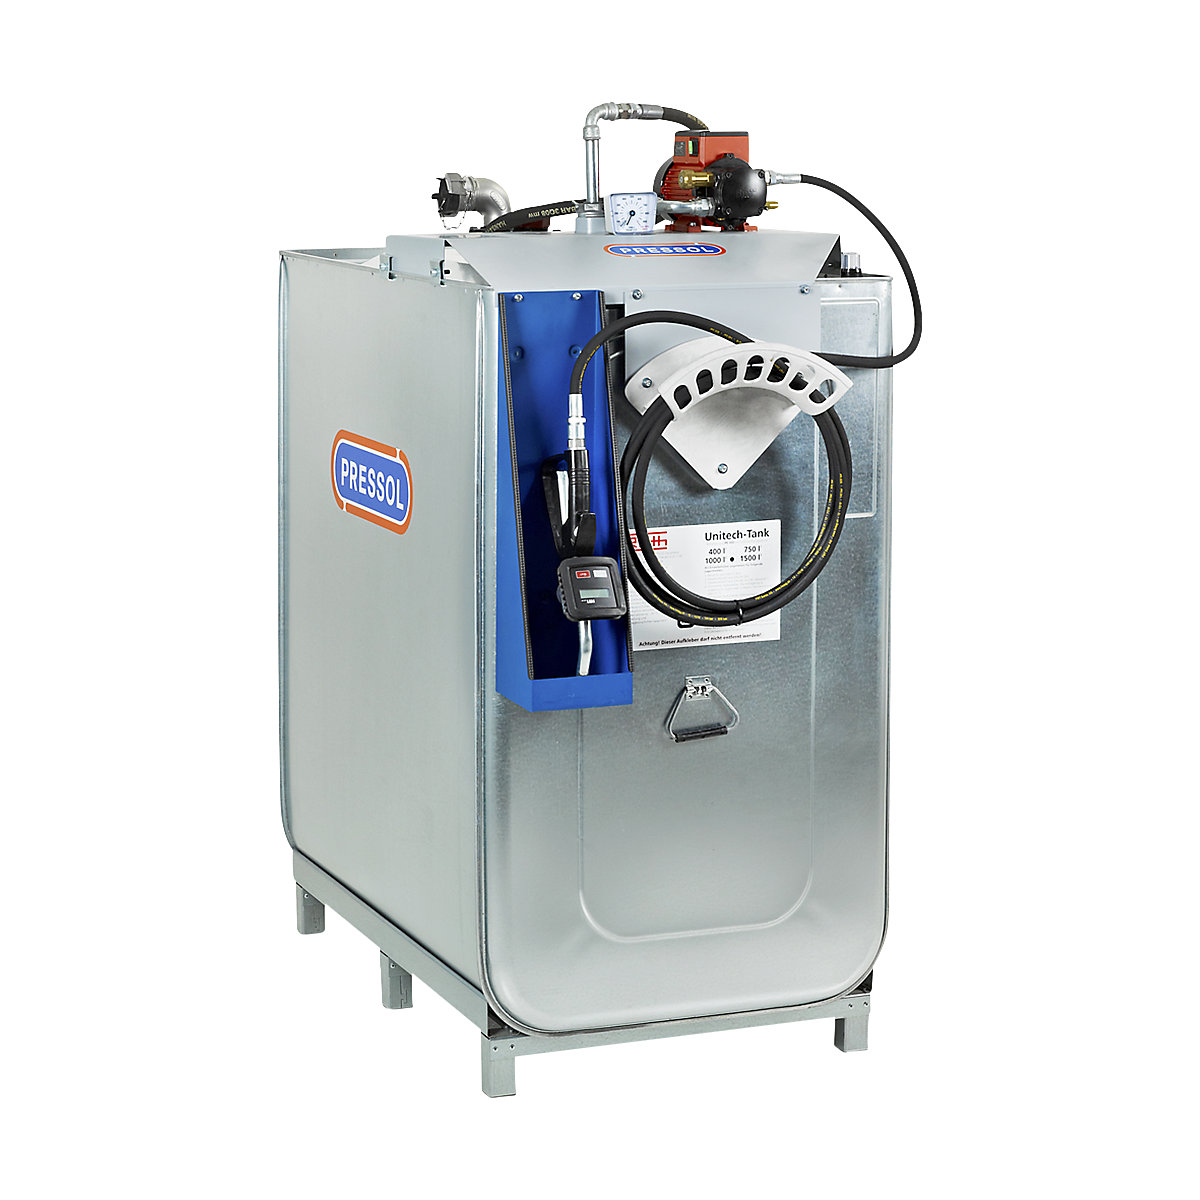 Compact oil tank system for fresh oil / low flammability oils – PRESSOL